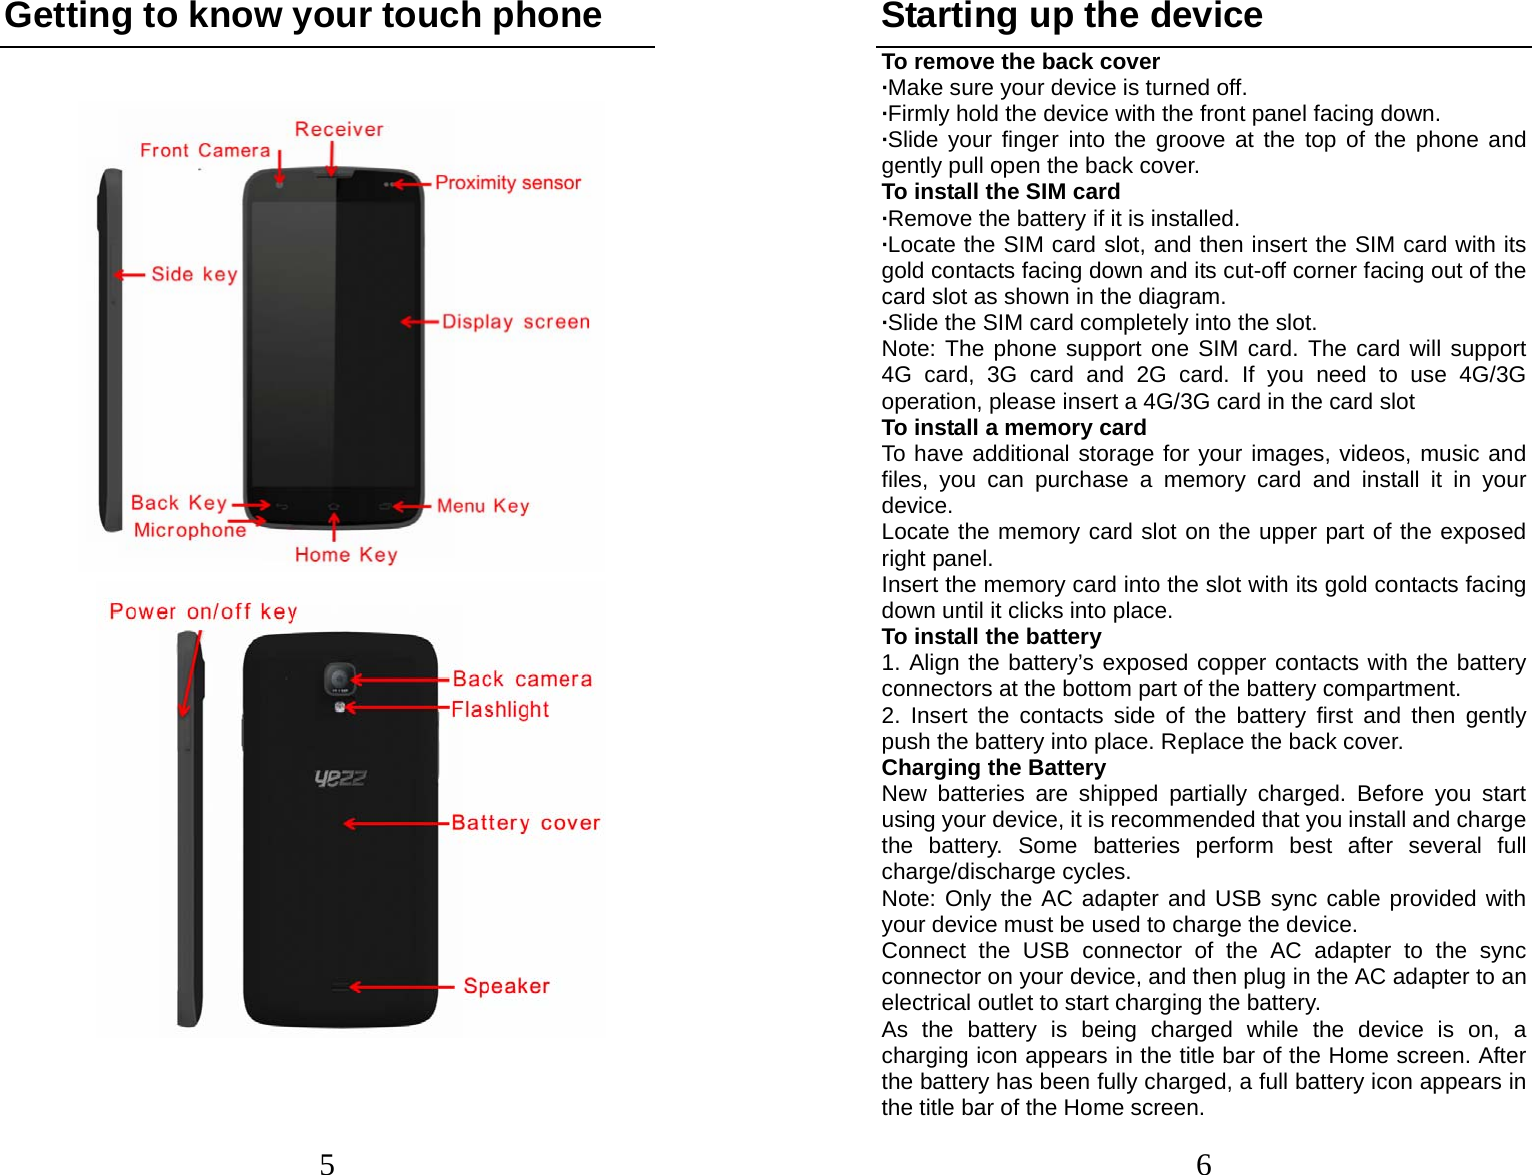 5 Getting to know your touch phone                                     6Starting up the device To remove the back cover   ·Make sure your device is turned off. ·Firmly hold the device with the front panel facing down.   ·Slide your finger into the groove at the top of the phone and gently pull open the back cover. To install the SIM card                    ·Remove the battery if it is installed.   ·Locate the SIM card slot, and then insert the SIM card with its gold contacts facing down and its cut-off corner facing out of the card slot as shown in the diagram. ·Slide the SIM card completely into the slot. Note: The phone support one SIM card. The card will support 4G card, 3G card and 2G card. If you need to use 4G/3G operation, please insert a 4G/3G card in the card slot To install a memory card To have additional storage for your images, videos, music and files, you can purchase a memory card and install it in your device. Locate the memory card slot on the upper part of the exposed right panel. Insert the memory card into the slot with its gold contacts facing down until it clicks into place. To install the battery 1. Align the battery’s exposed copper contacts with the battery connectors at the bottom part of the battery compartment.     2. Insert the contacts side of the battery first and then gently push the battery into place. Replace the back cover. Charging the Battery New batteries are shipped partially charged. Before you start using your device, it is recommended that you install and charge the battery. Some batteries perform best after several full charge/discharge cycles.     Note: Only the AC adapter and USB sync cable provided with your device must be used to charge the device.   Connect the USB connector of the AC adapter to the sync connector on your device, and then plug in the AC adapter to an electrical outlet to start charging the battery.     As the battery is being charged while the device is on, a charging icon appears in the title bar of the Home screen. After the battery has been fully charged, a full battery icon appears in the title bar of the Home screen.     